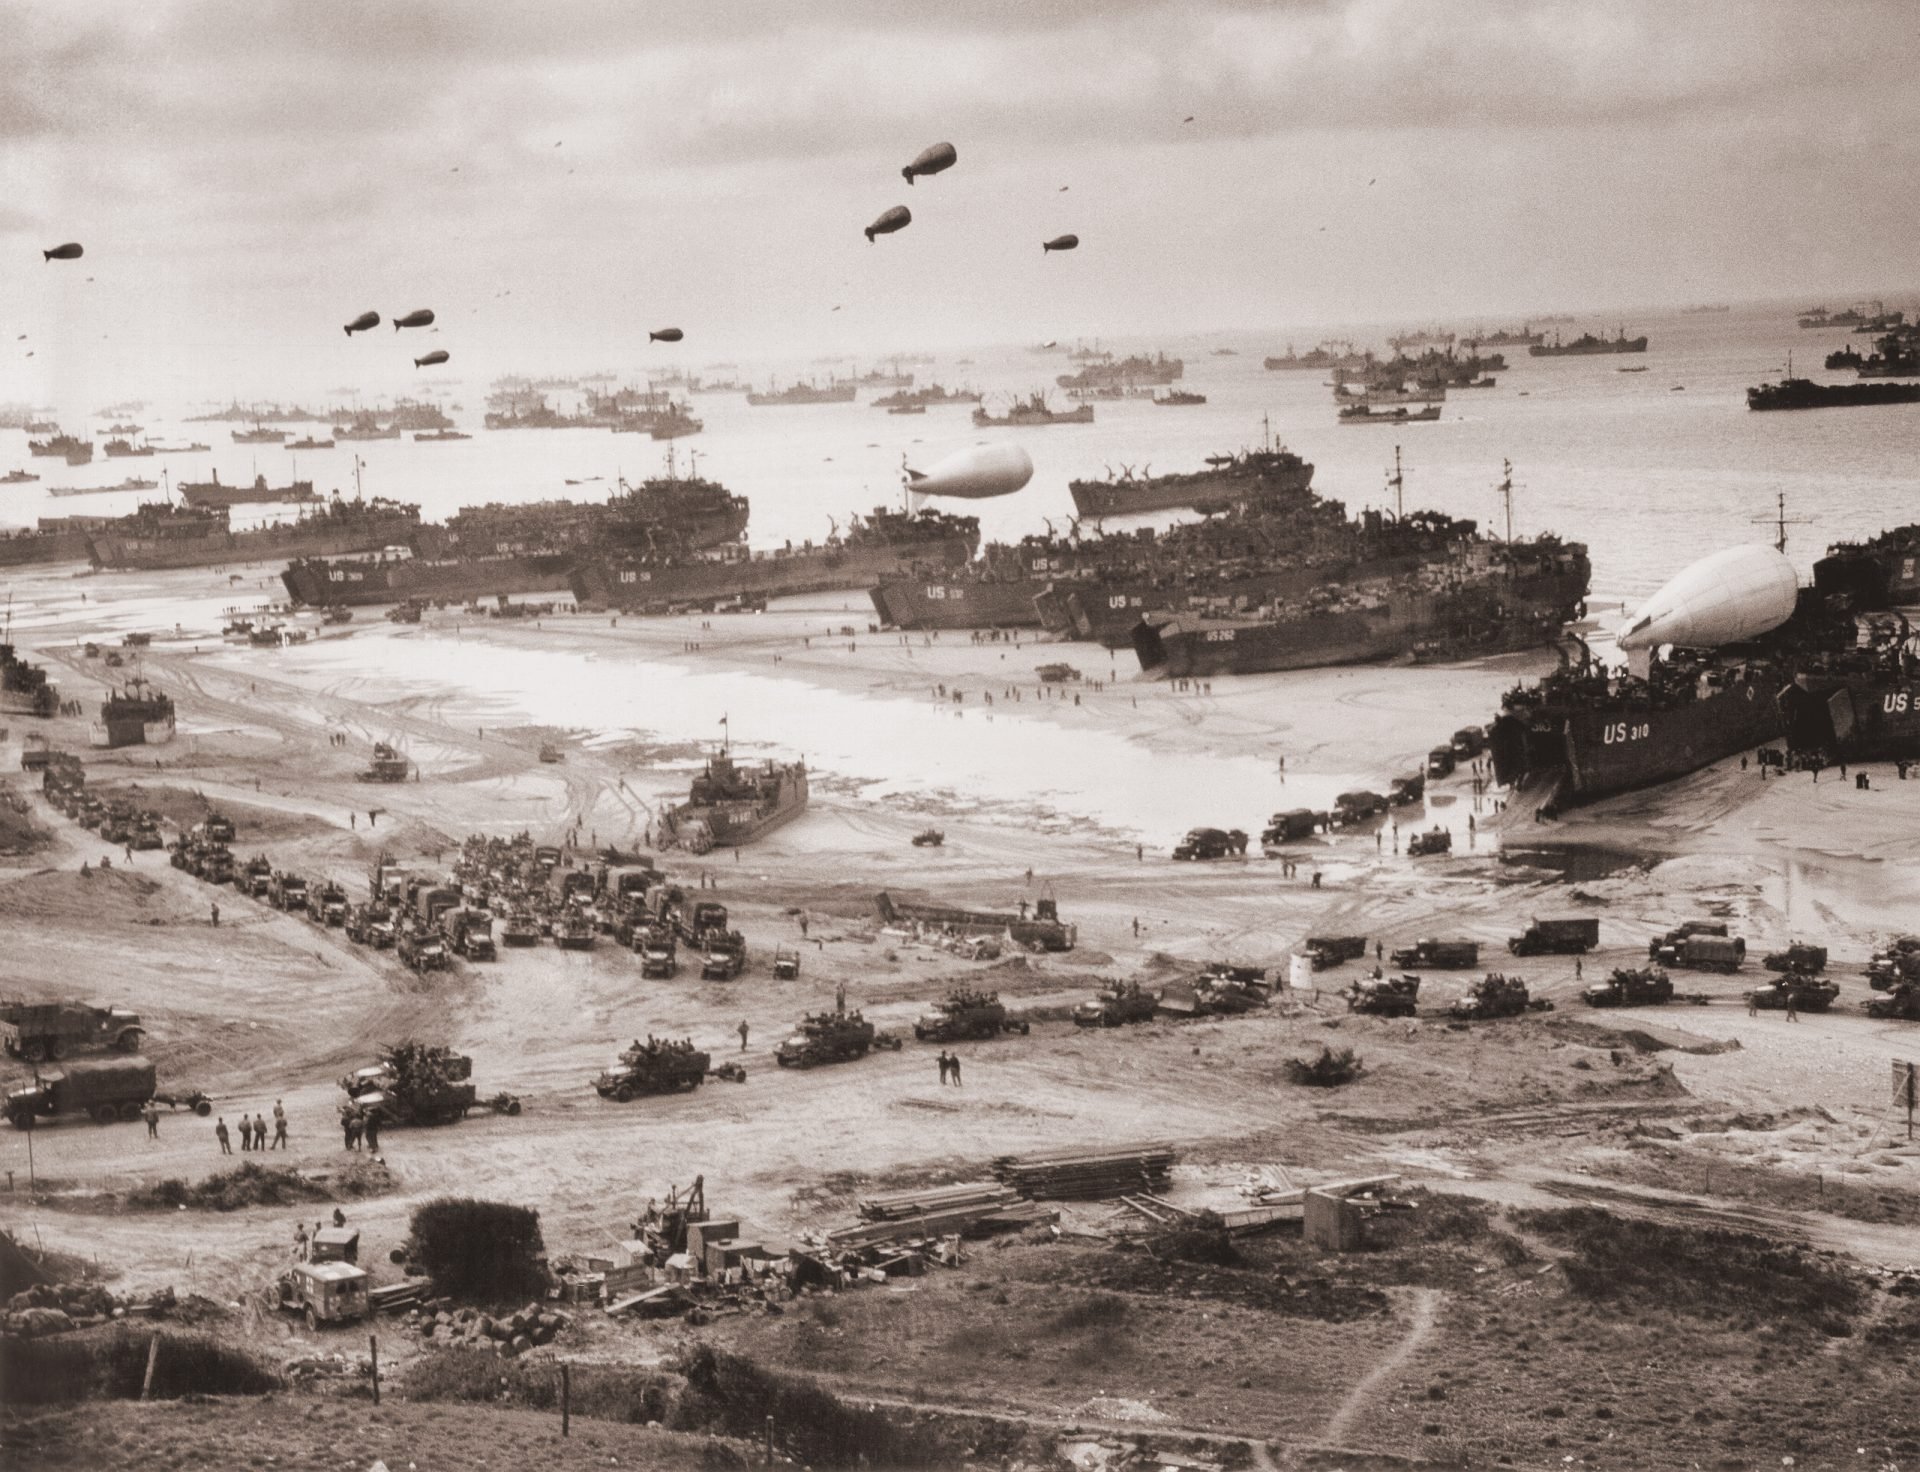 A historical photograph of a beach landing during a military operation, showing the beach and the sea filled with military vehicles, equipment, personnel, ships and boats. There are also blimps and parachutes in the sky. The photograph is black and white, grainy and faded.